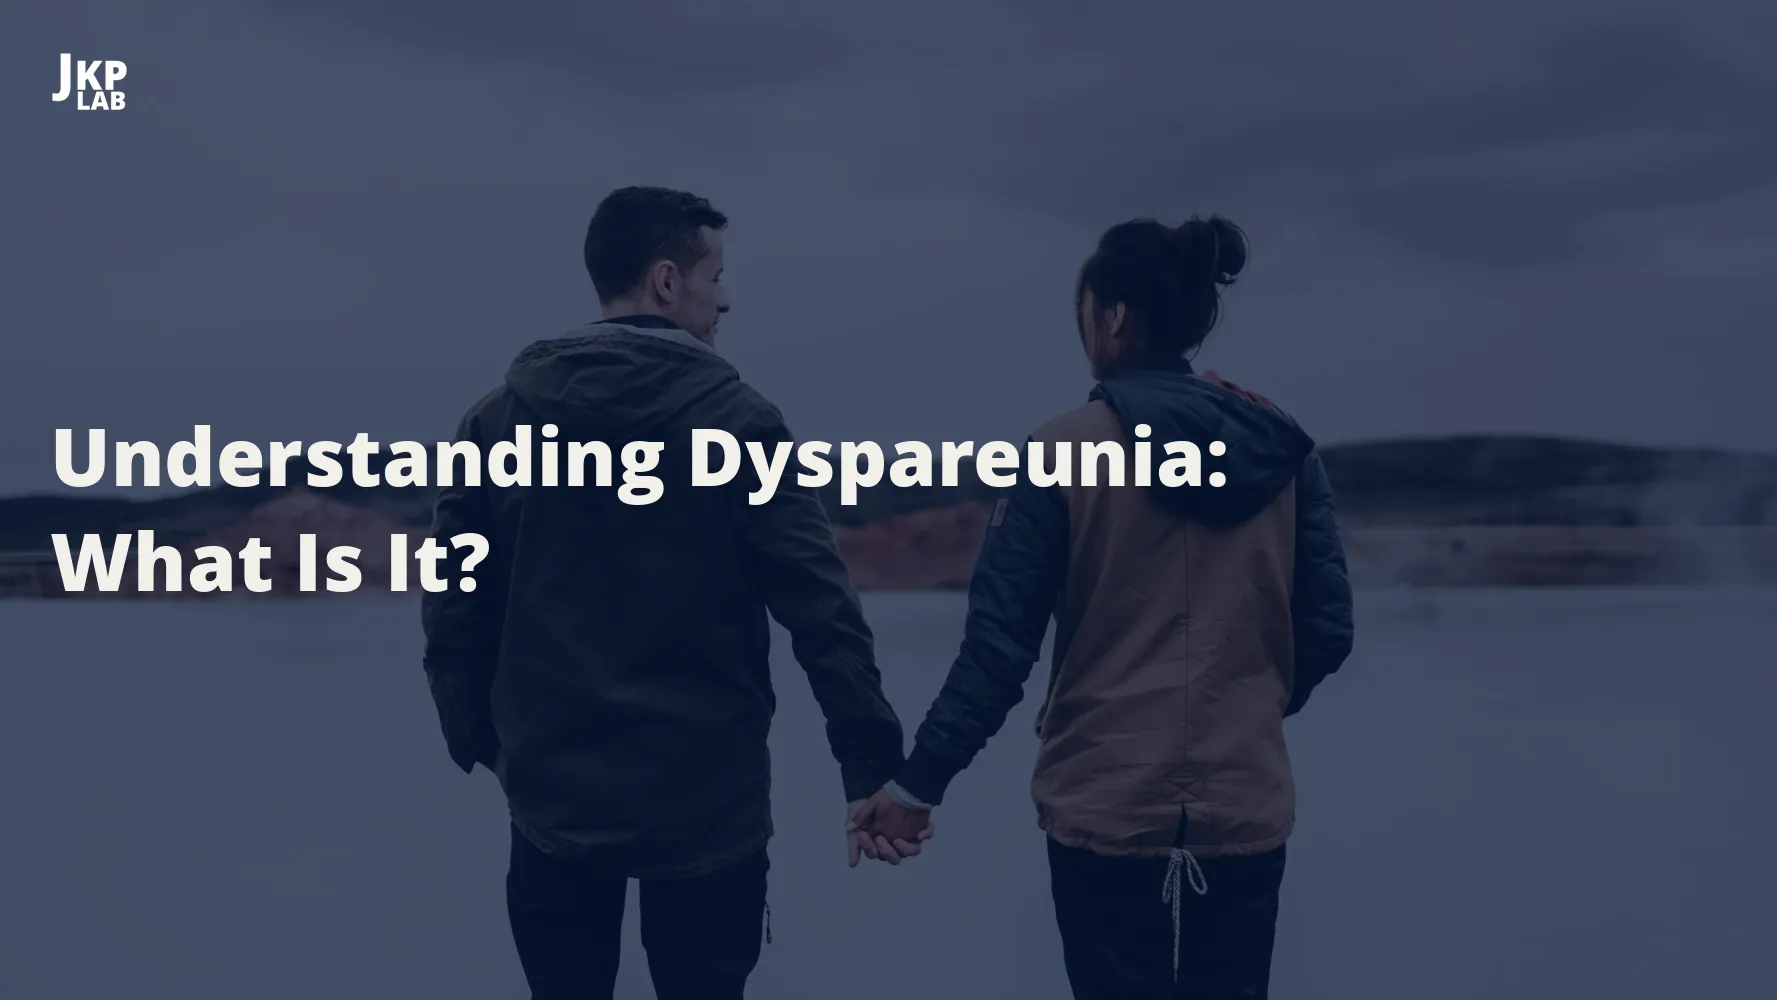 Dyspareunia and Relationship Strain: Finding Solutions